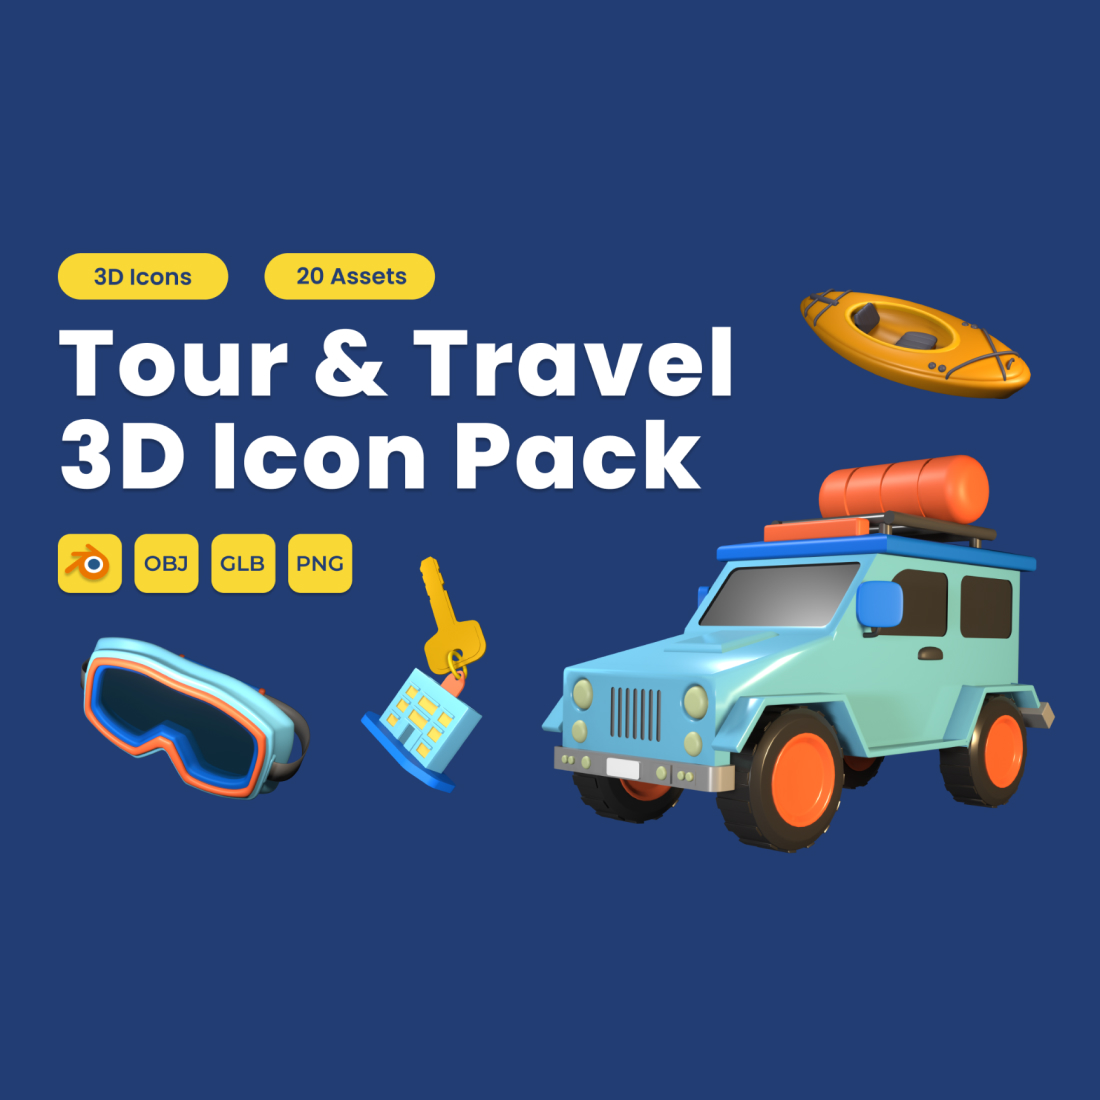 Tour and Travel 3D Icon Pack Vol 4 cover image.